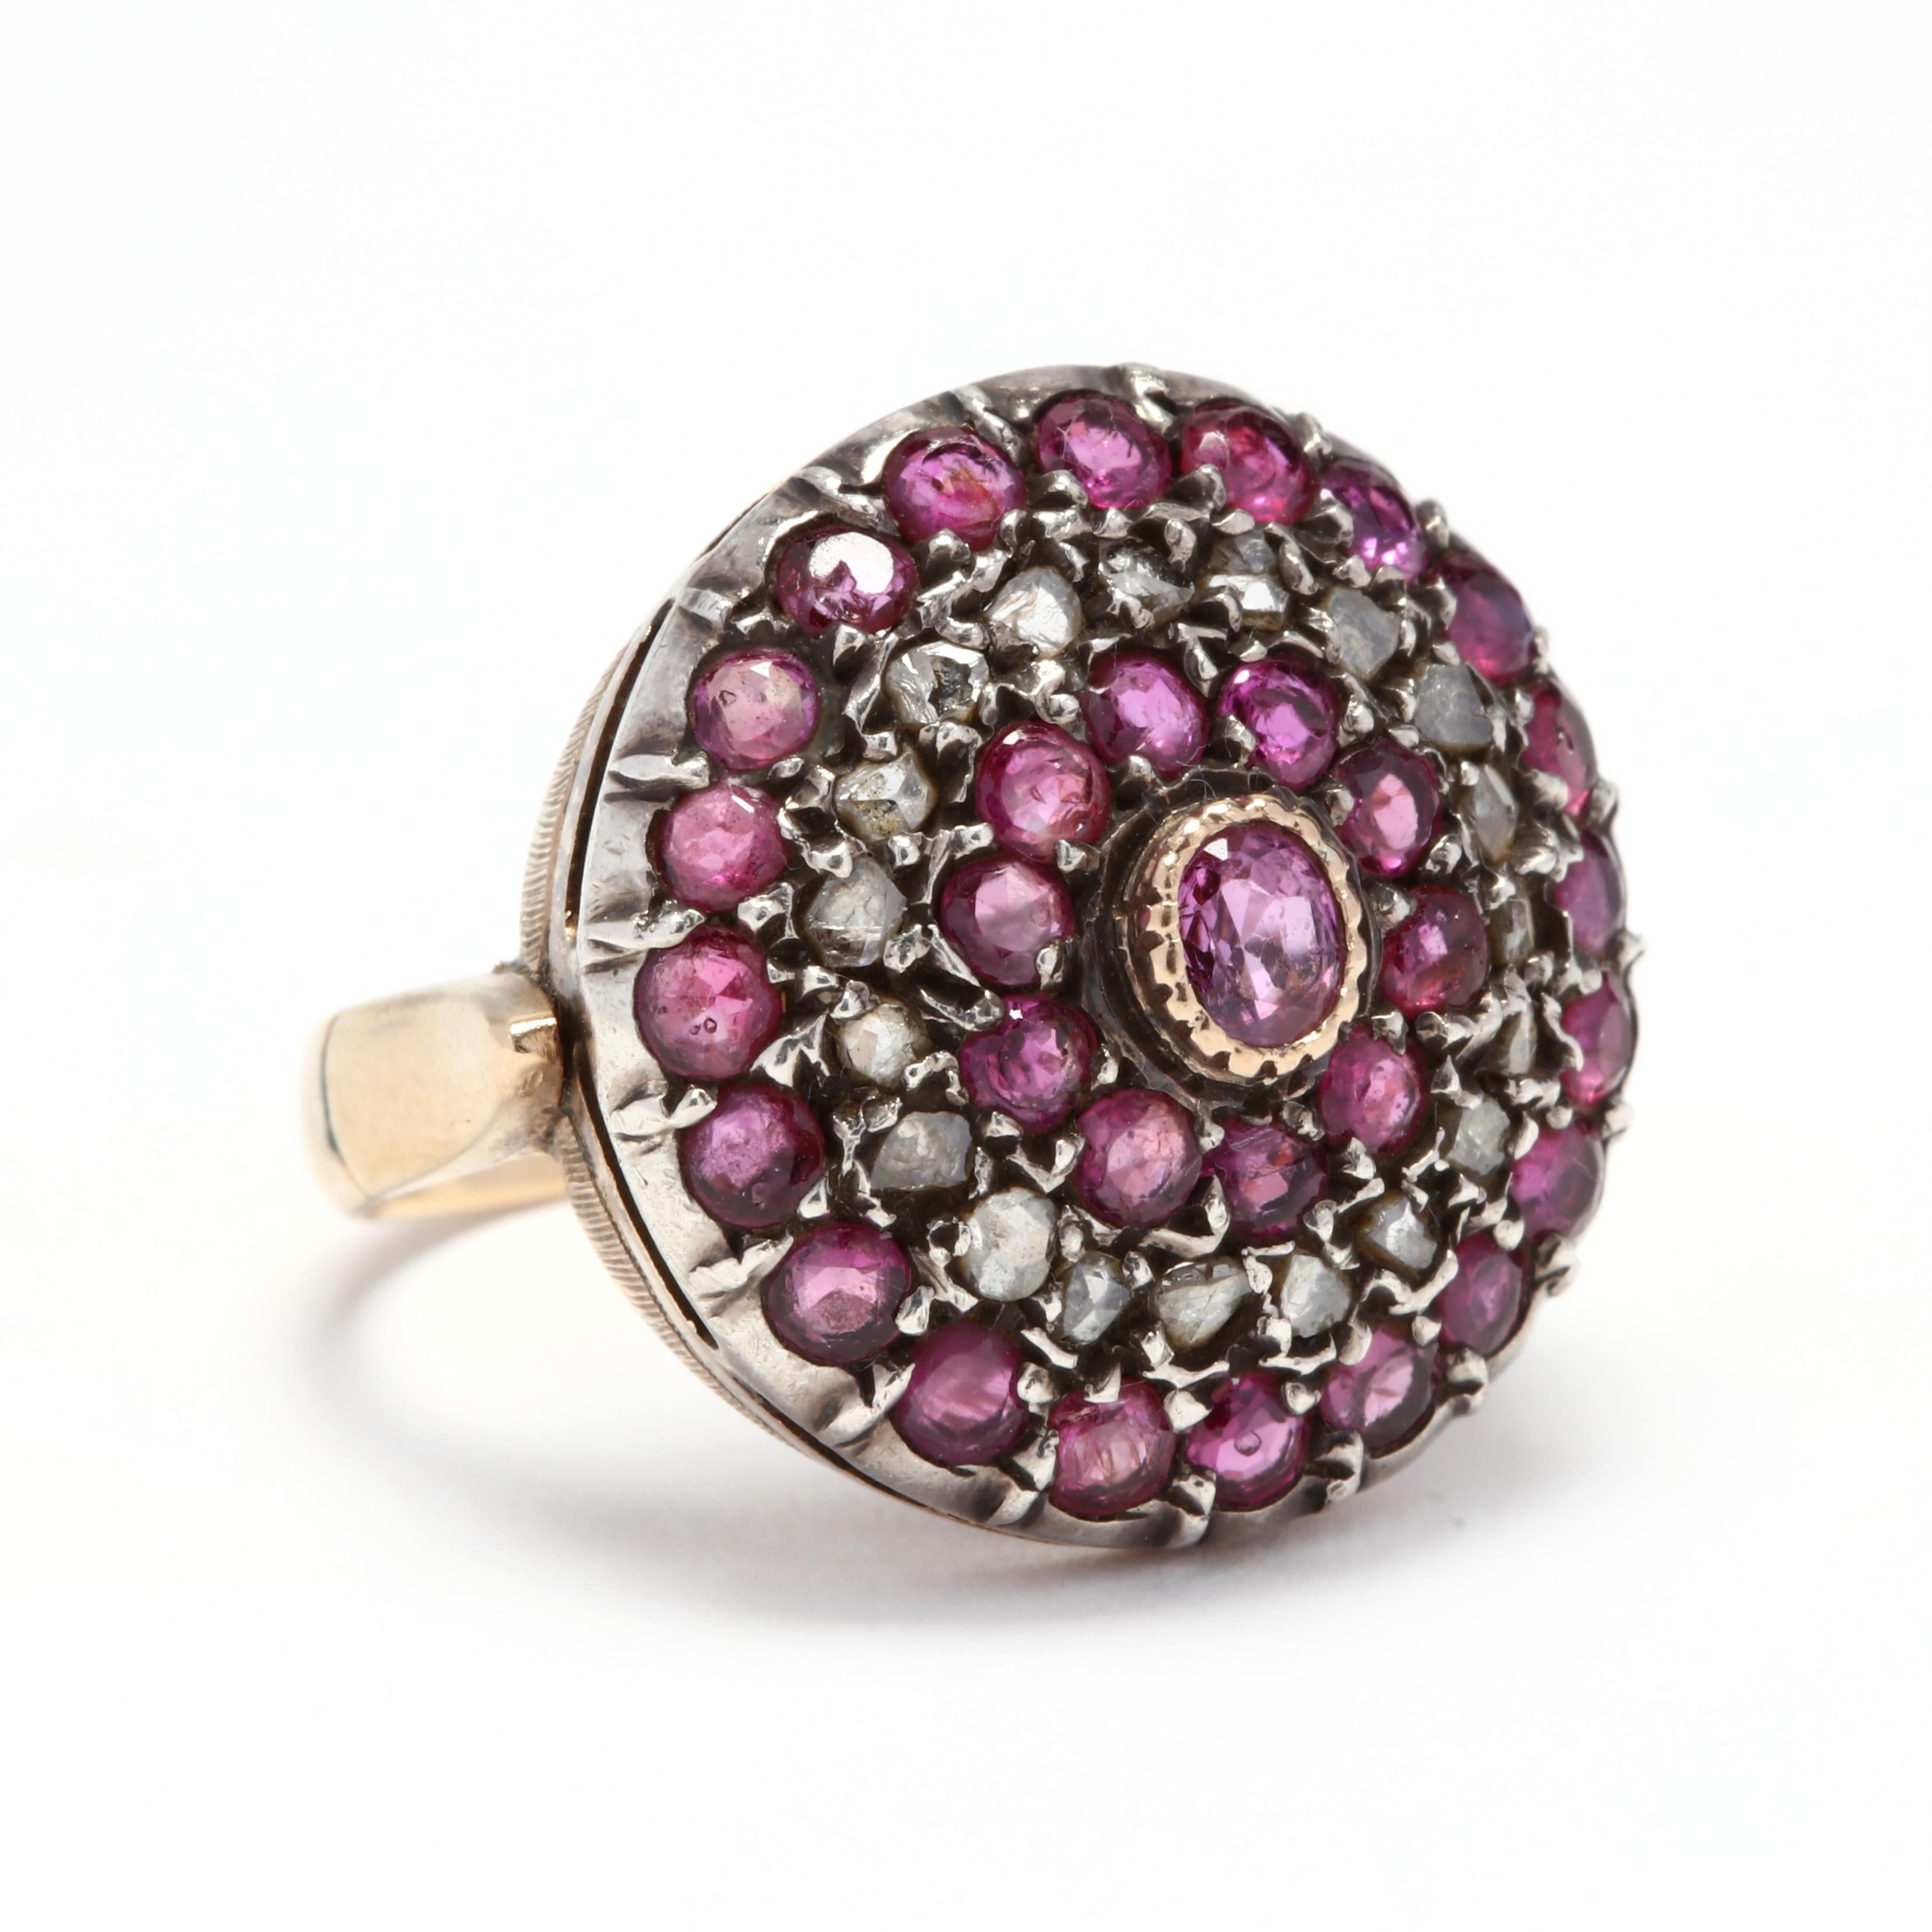 An antique 18 karat yellow gold, silver, diamond and ruby target ring. This ring features a bezel set, oval cut ruby center stone surrounded by three halos of round cut ruby and diamond accents.

Stones:
- rubies
- oval cut, 1 stone
- 4 x 3 mm
-